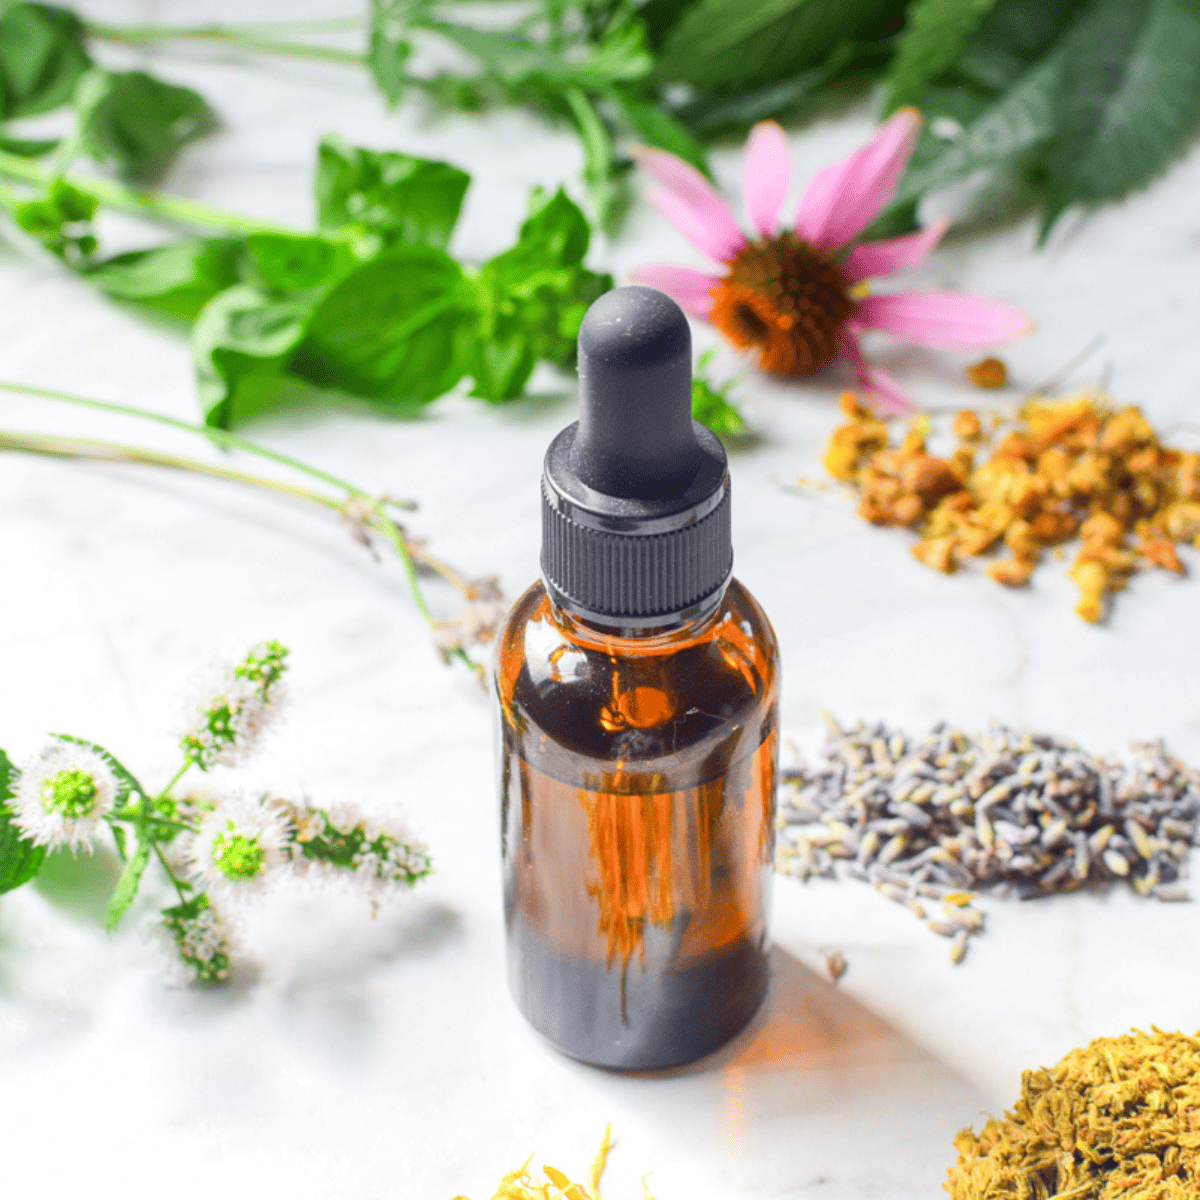 How to Build a Home Apothecary: using dried herbs, tinctures